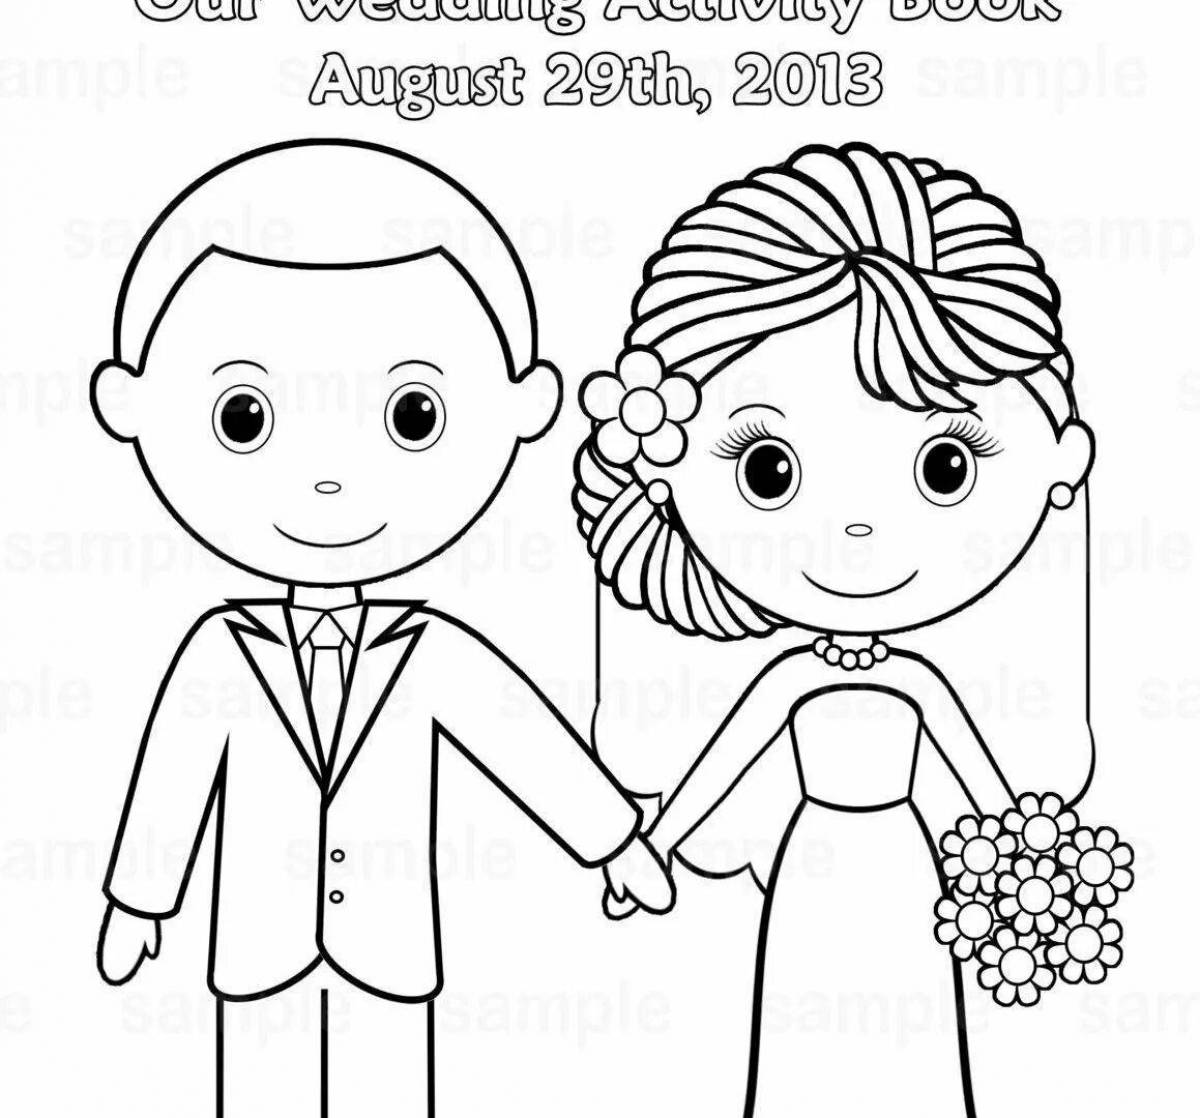 Amazing wedding coloring book for kids